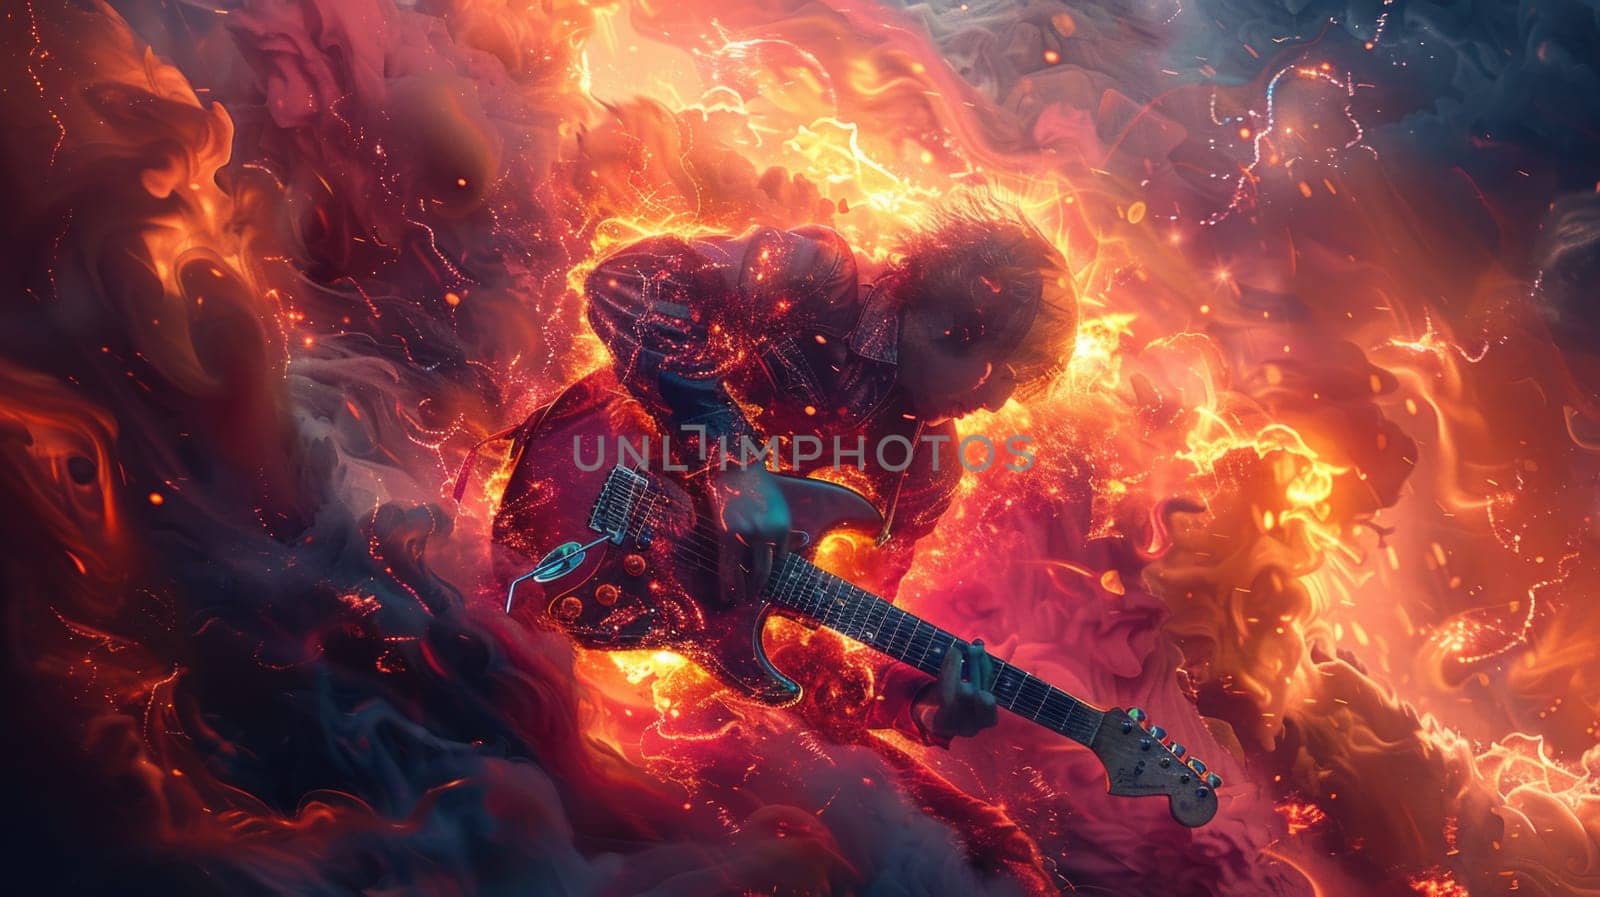 Guitar Engulfed in Flames and Smoke by but_photo